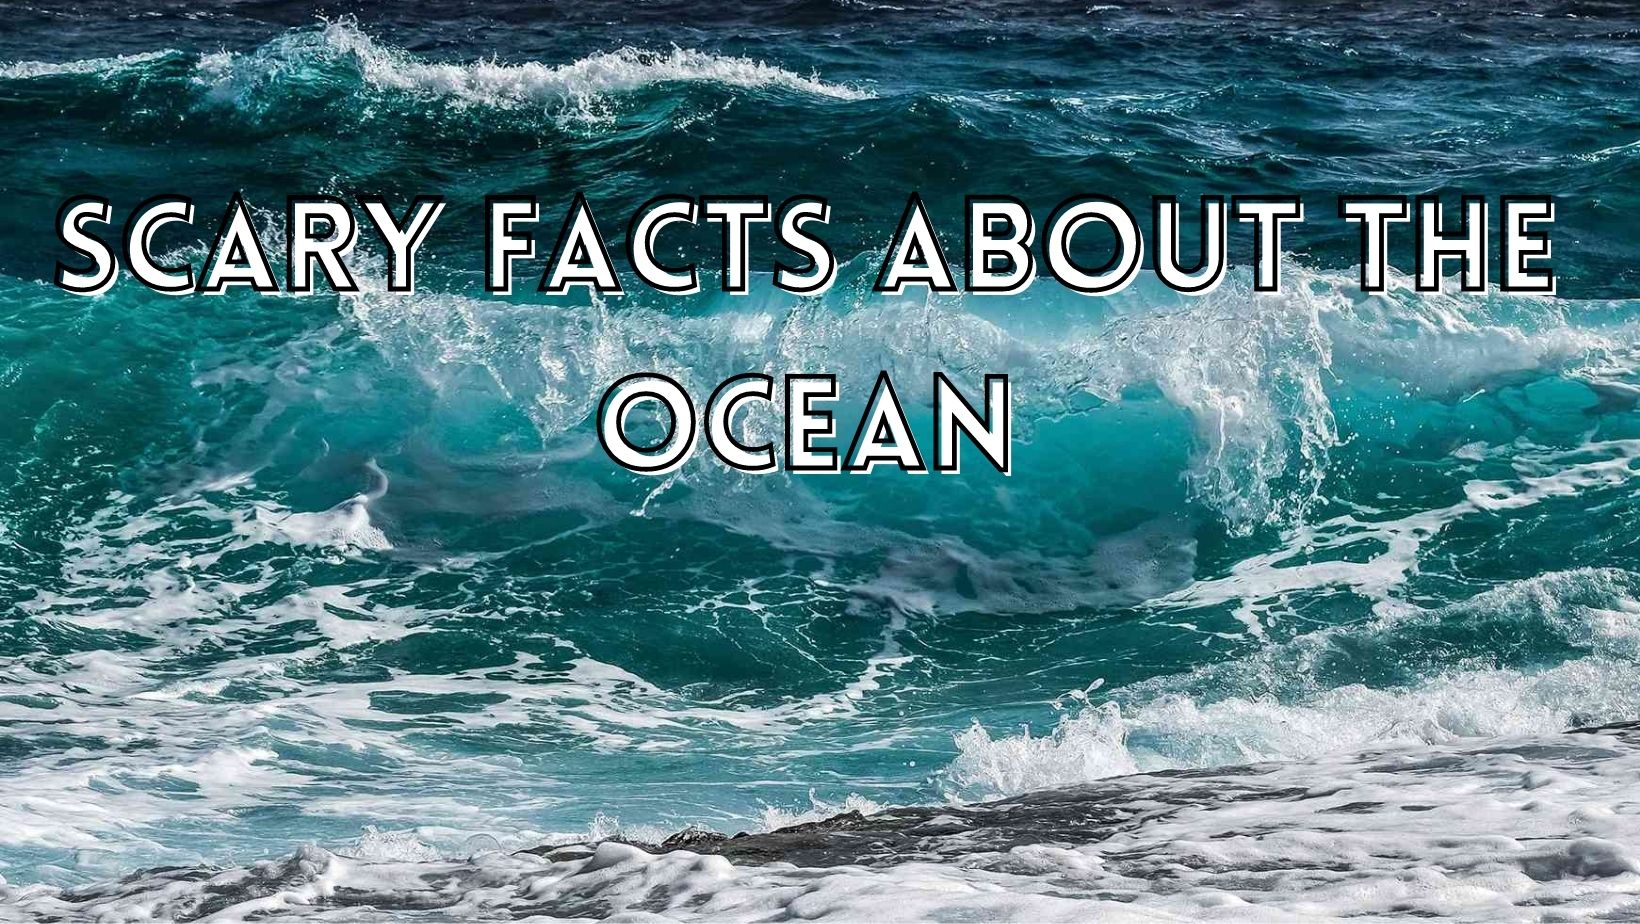 Interesting scary facts about the ocean